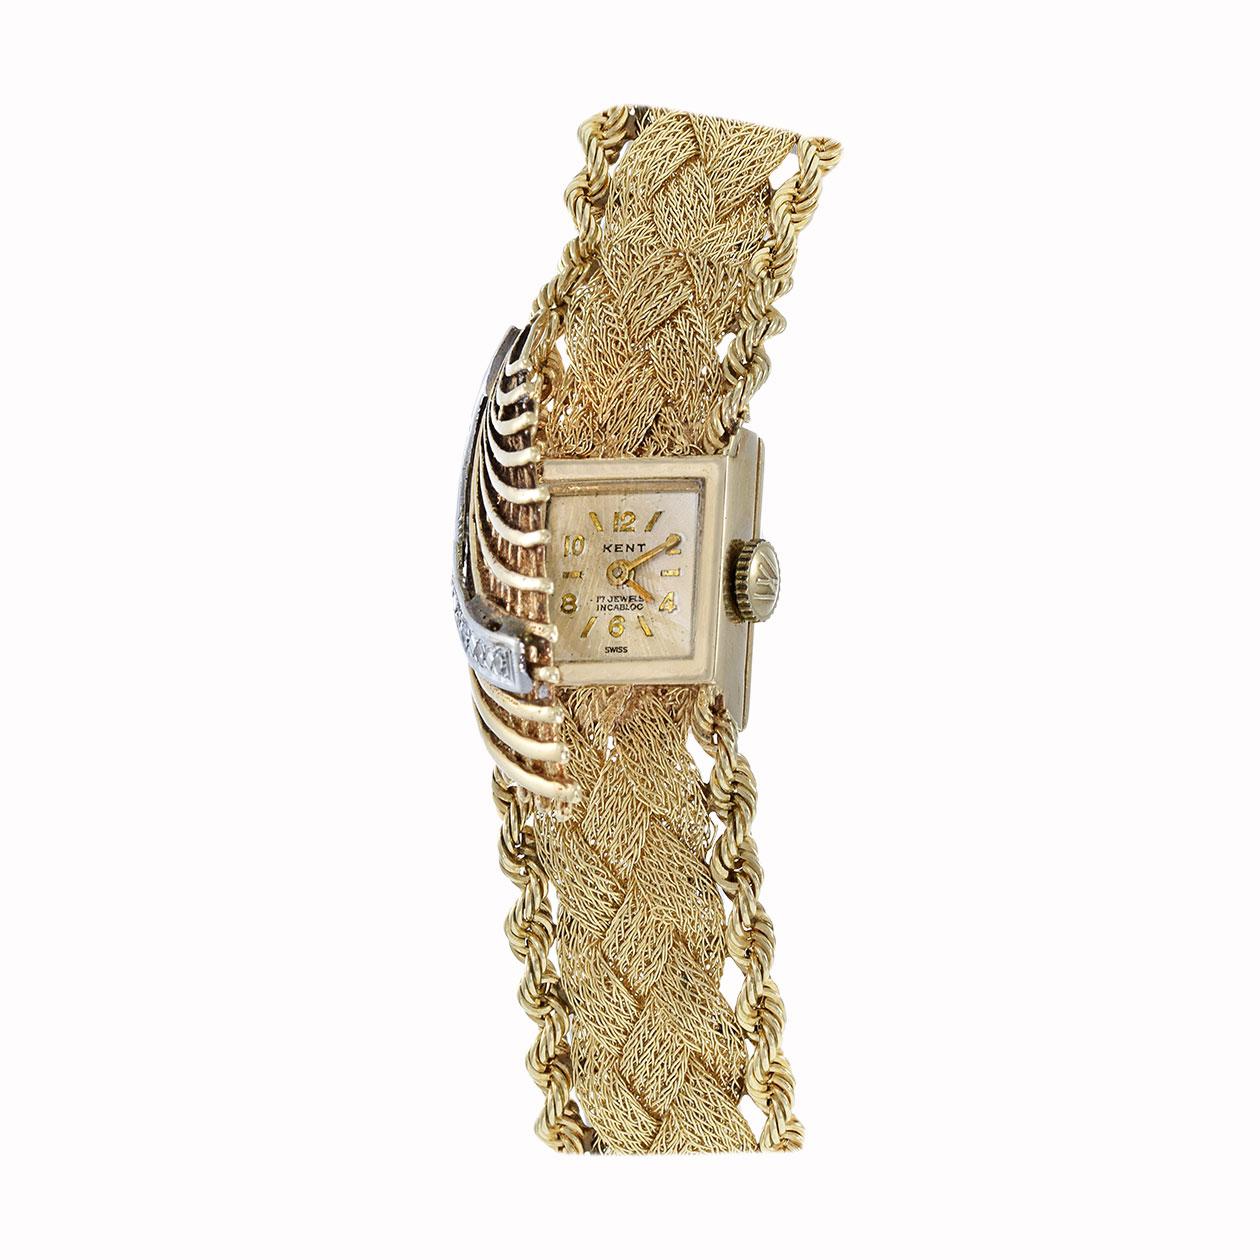 Introducing the Vintage 14kt Yellow Gold Eloga Kent Cocktail Watch, a timeless treasure exuding elegance and sophistication. Crafted with meticulous attention to detail, this exquisite timepiece features a 14x19mm rectangular case adorned with